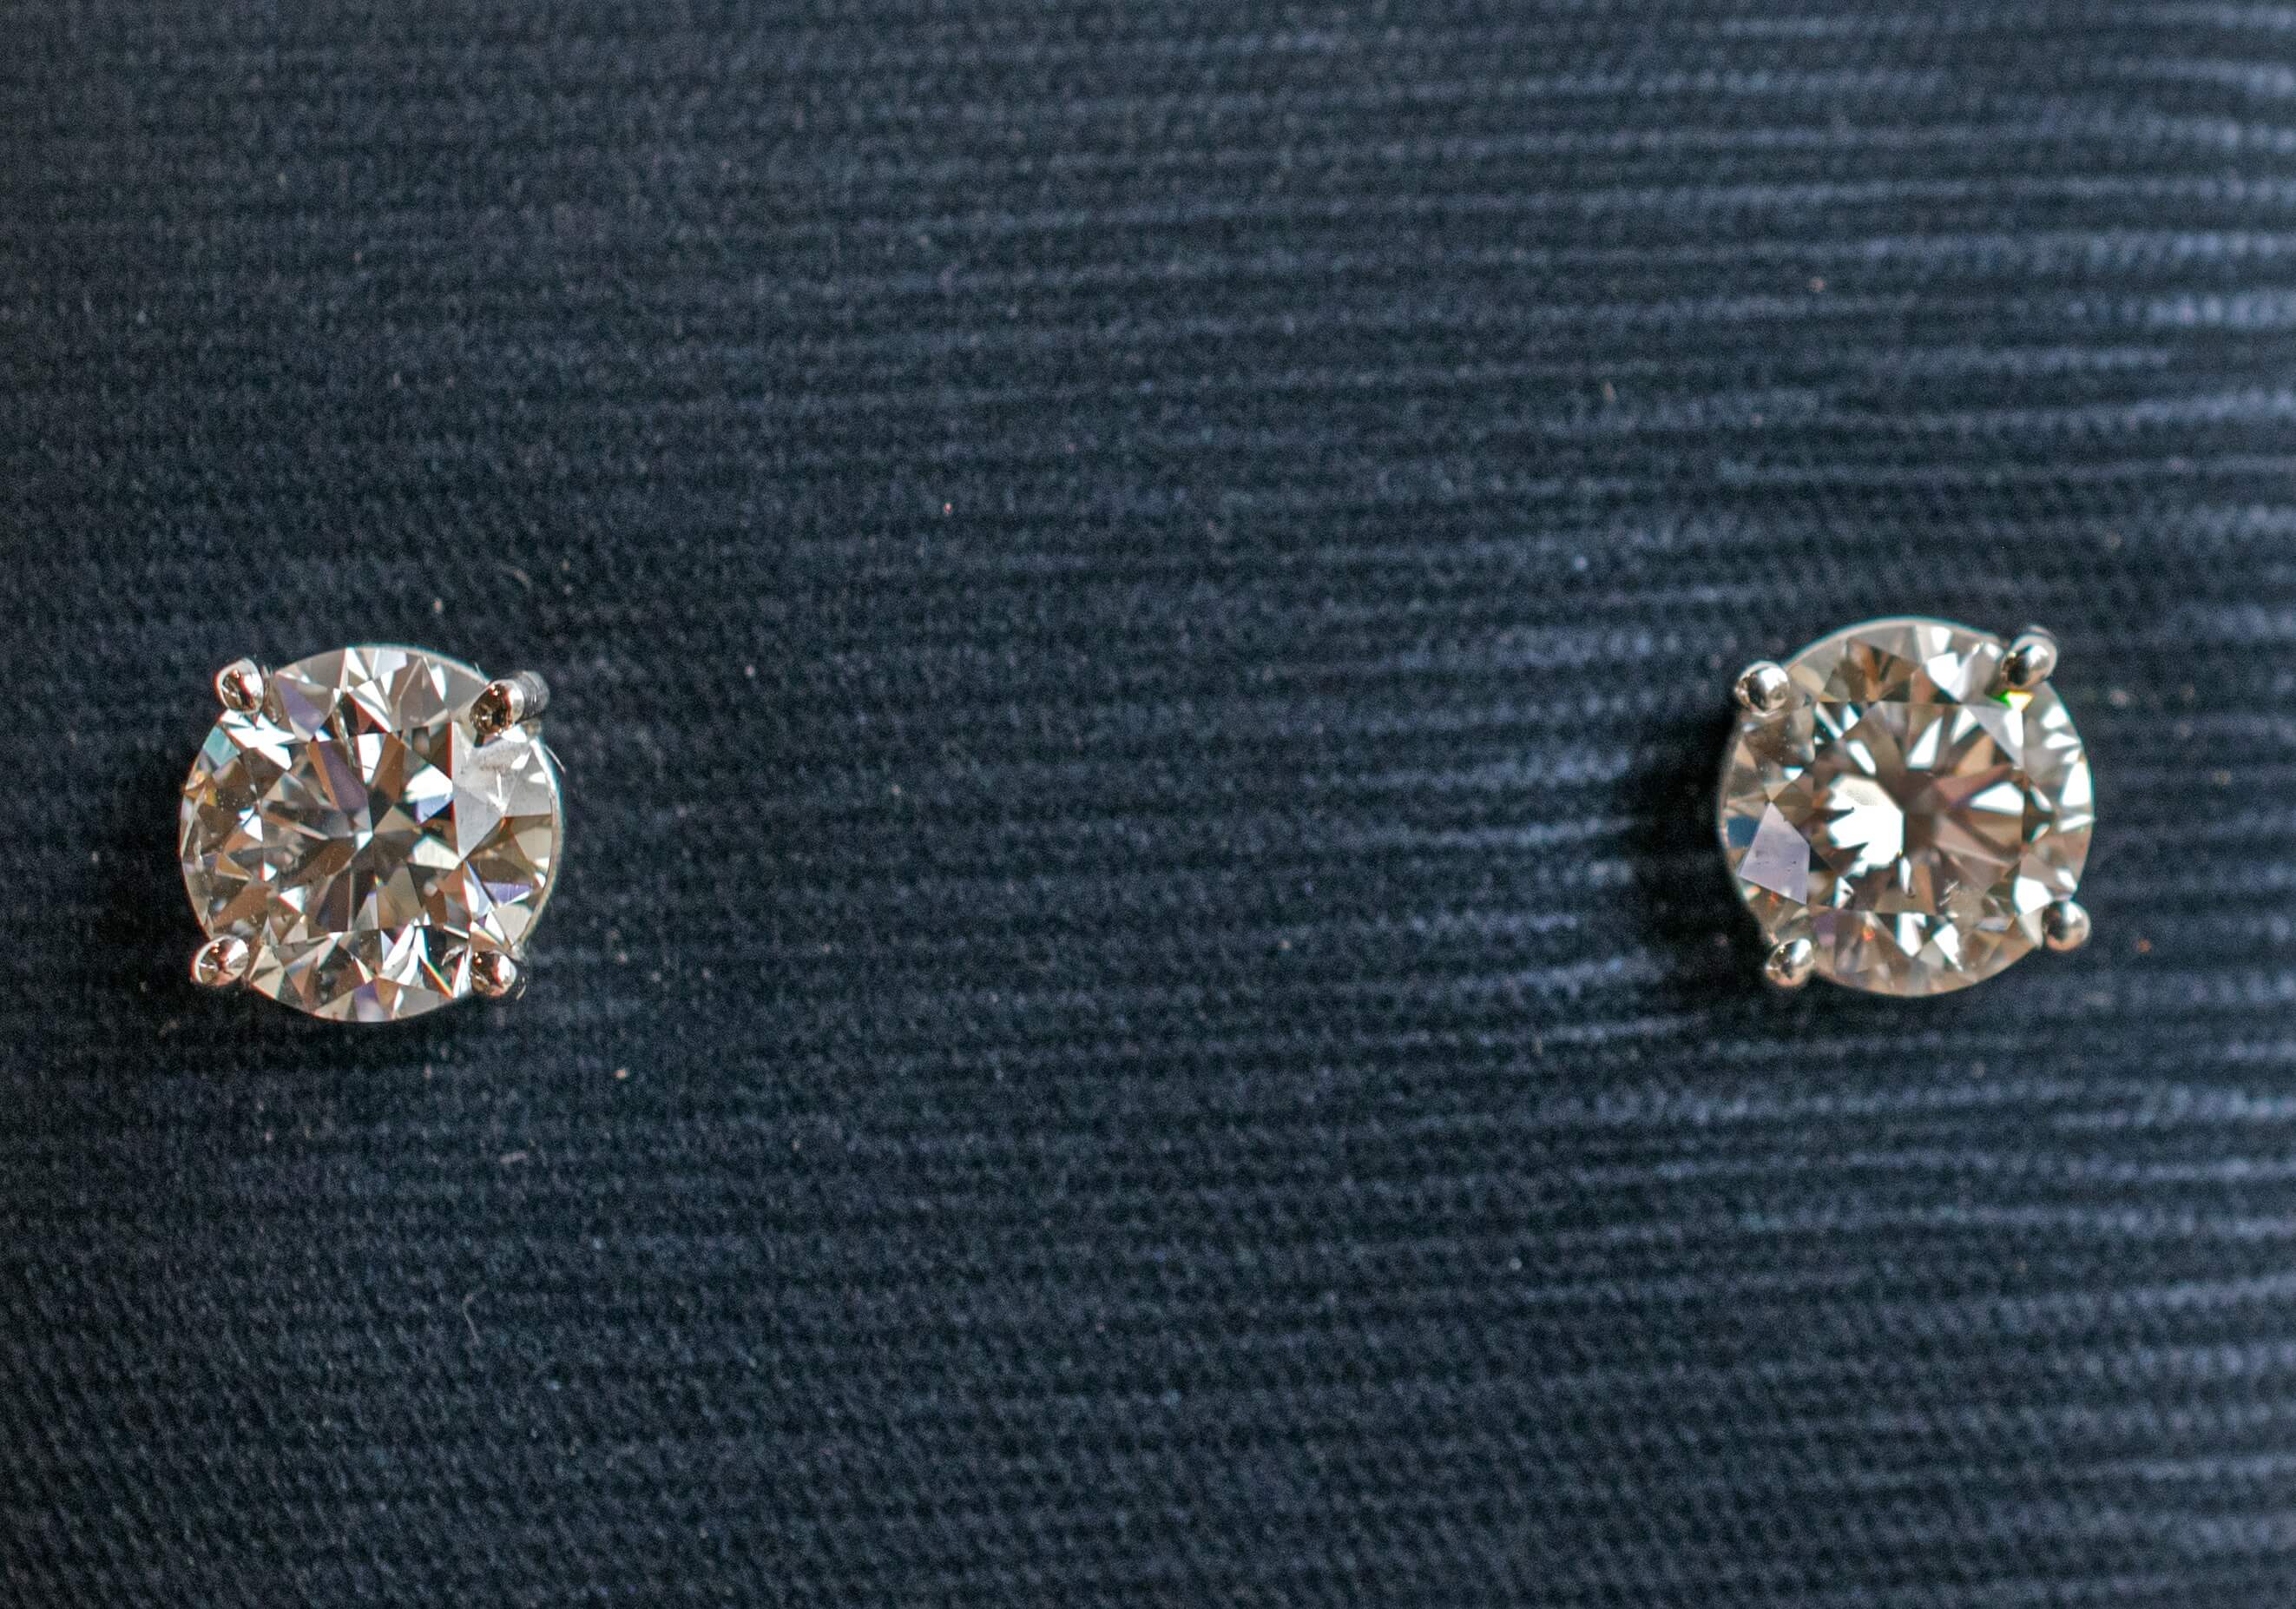 Saskatoon-Based GMG Jewellers Offering a Special Holiday Deal on Diamond Stud Earrings